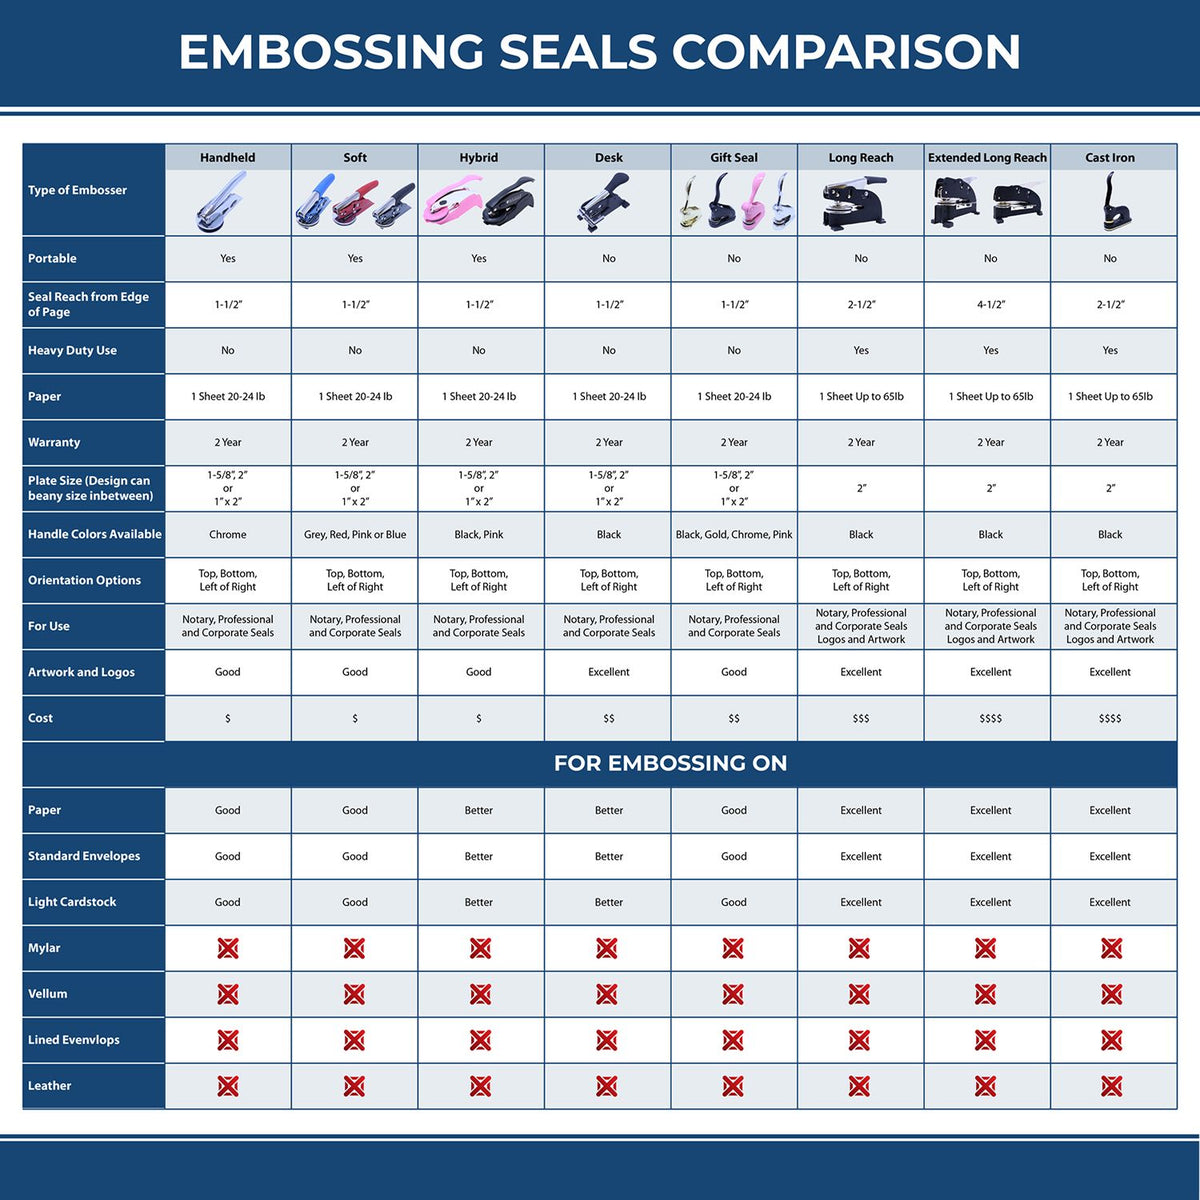 A comparison chart for the different types of mount models available for the Michigan Desk Architect Embossing Seal.